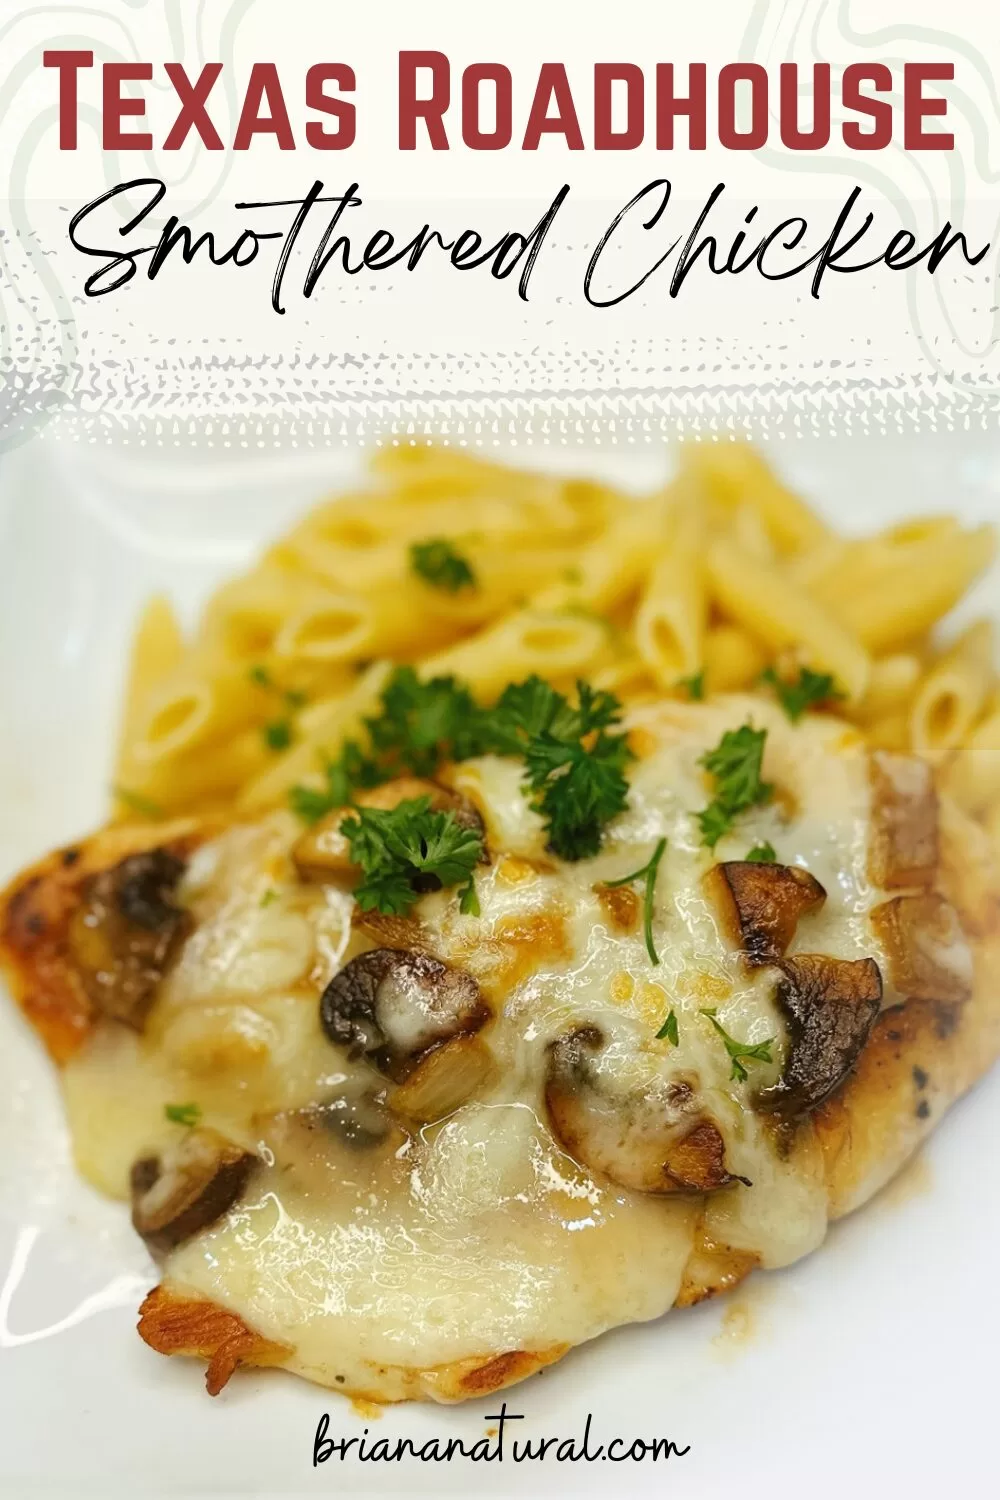 texas roadhouse smothered chicken recipe cover photo